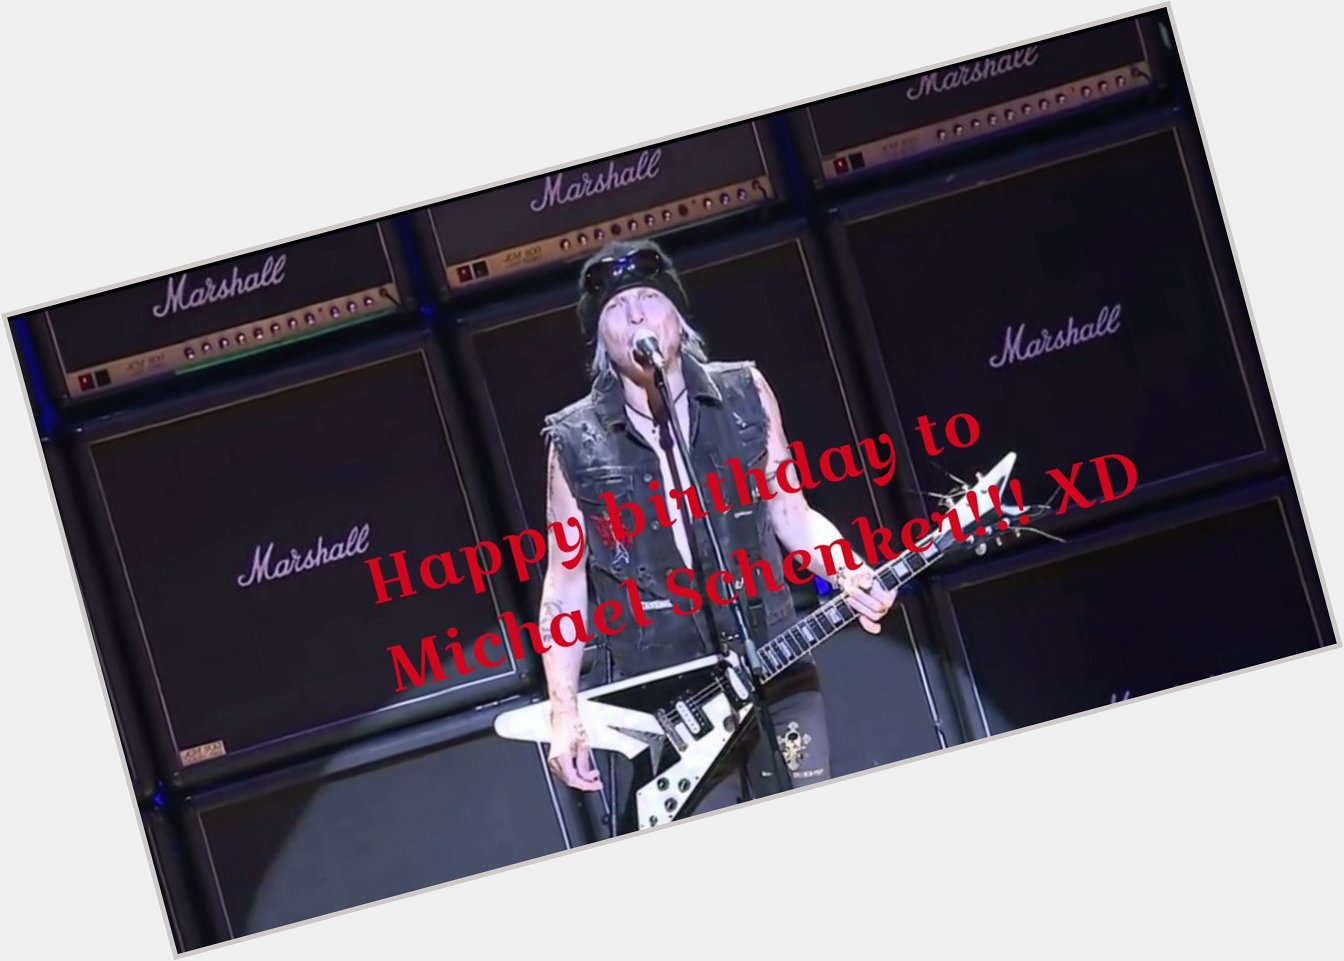  Happy birthday to Michael Schenker.
In 2017, he will come to Japan and will play a guitar!!! XD 